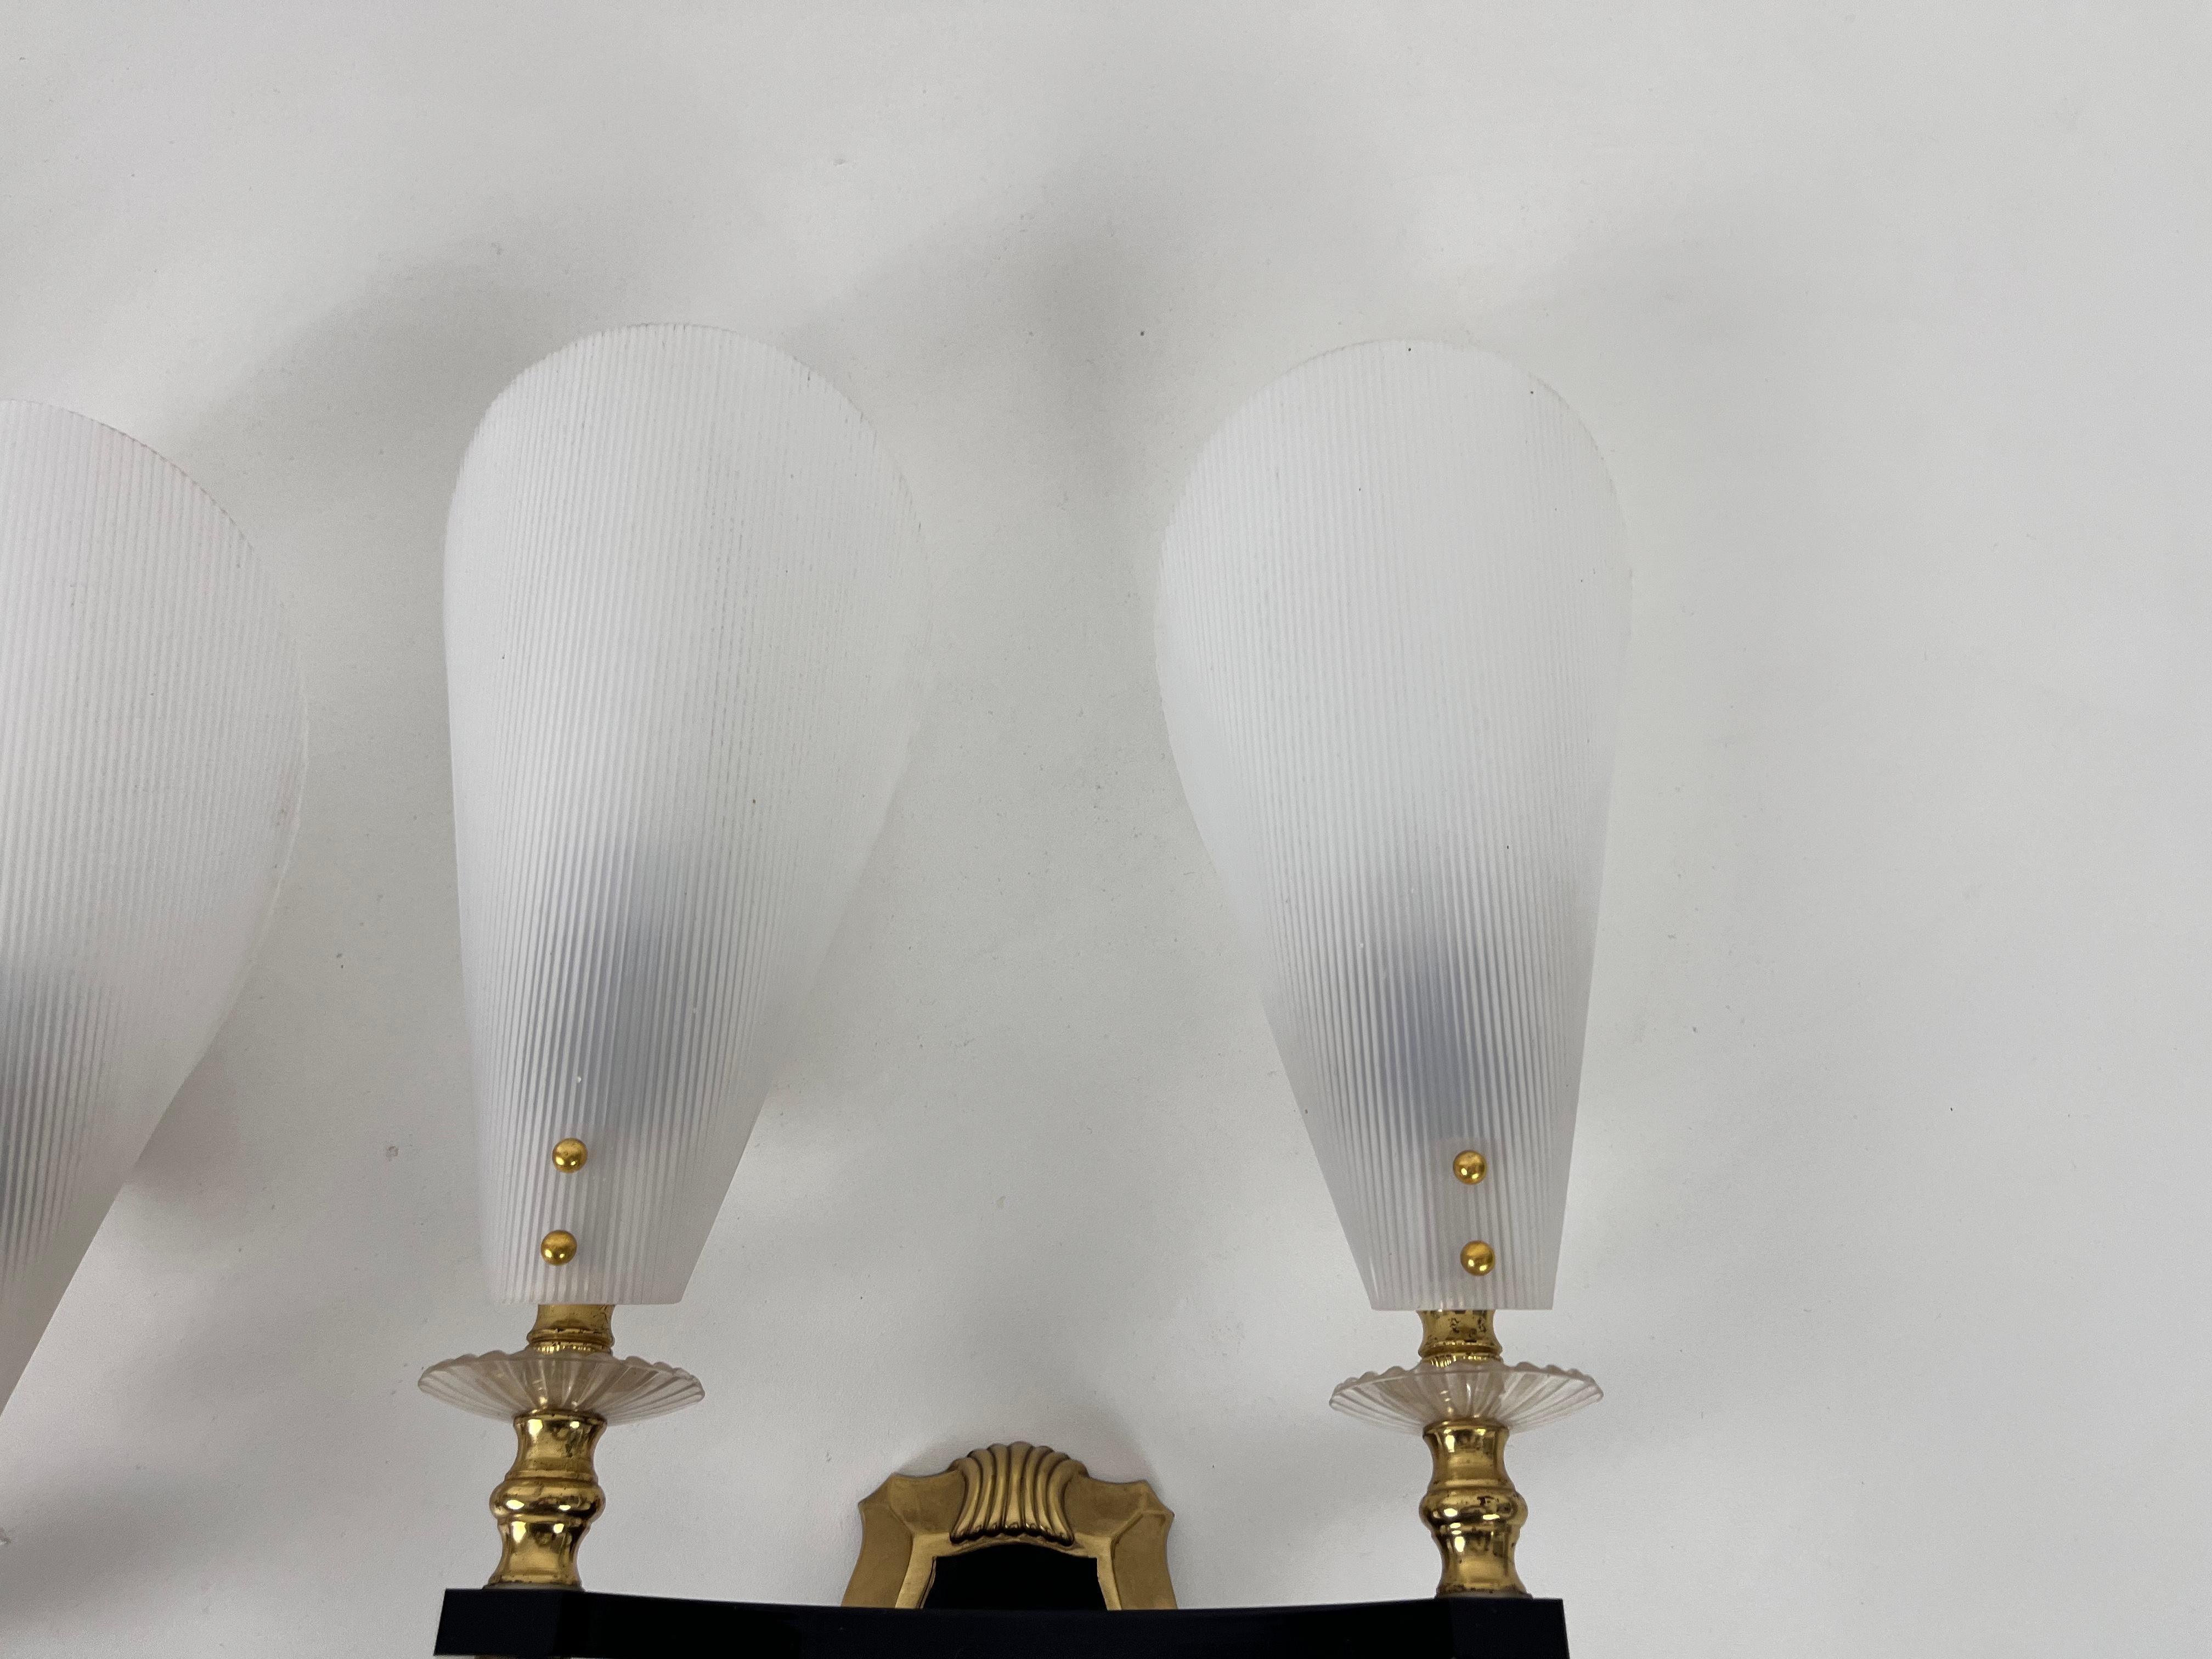 Pair of 2 Brass and Plexiglass Wall Lamps by Maison Arlus, 1960, France For Sale 5